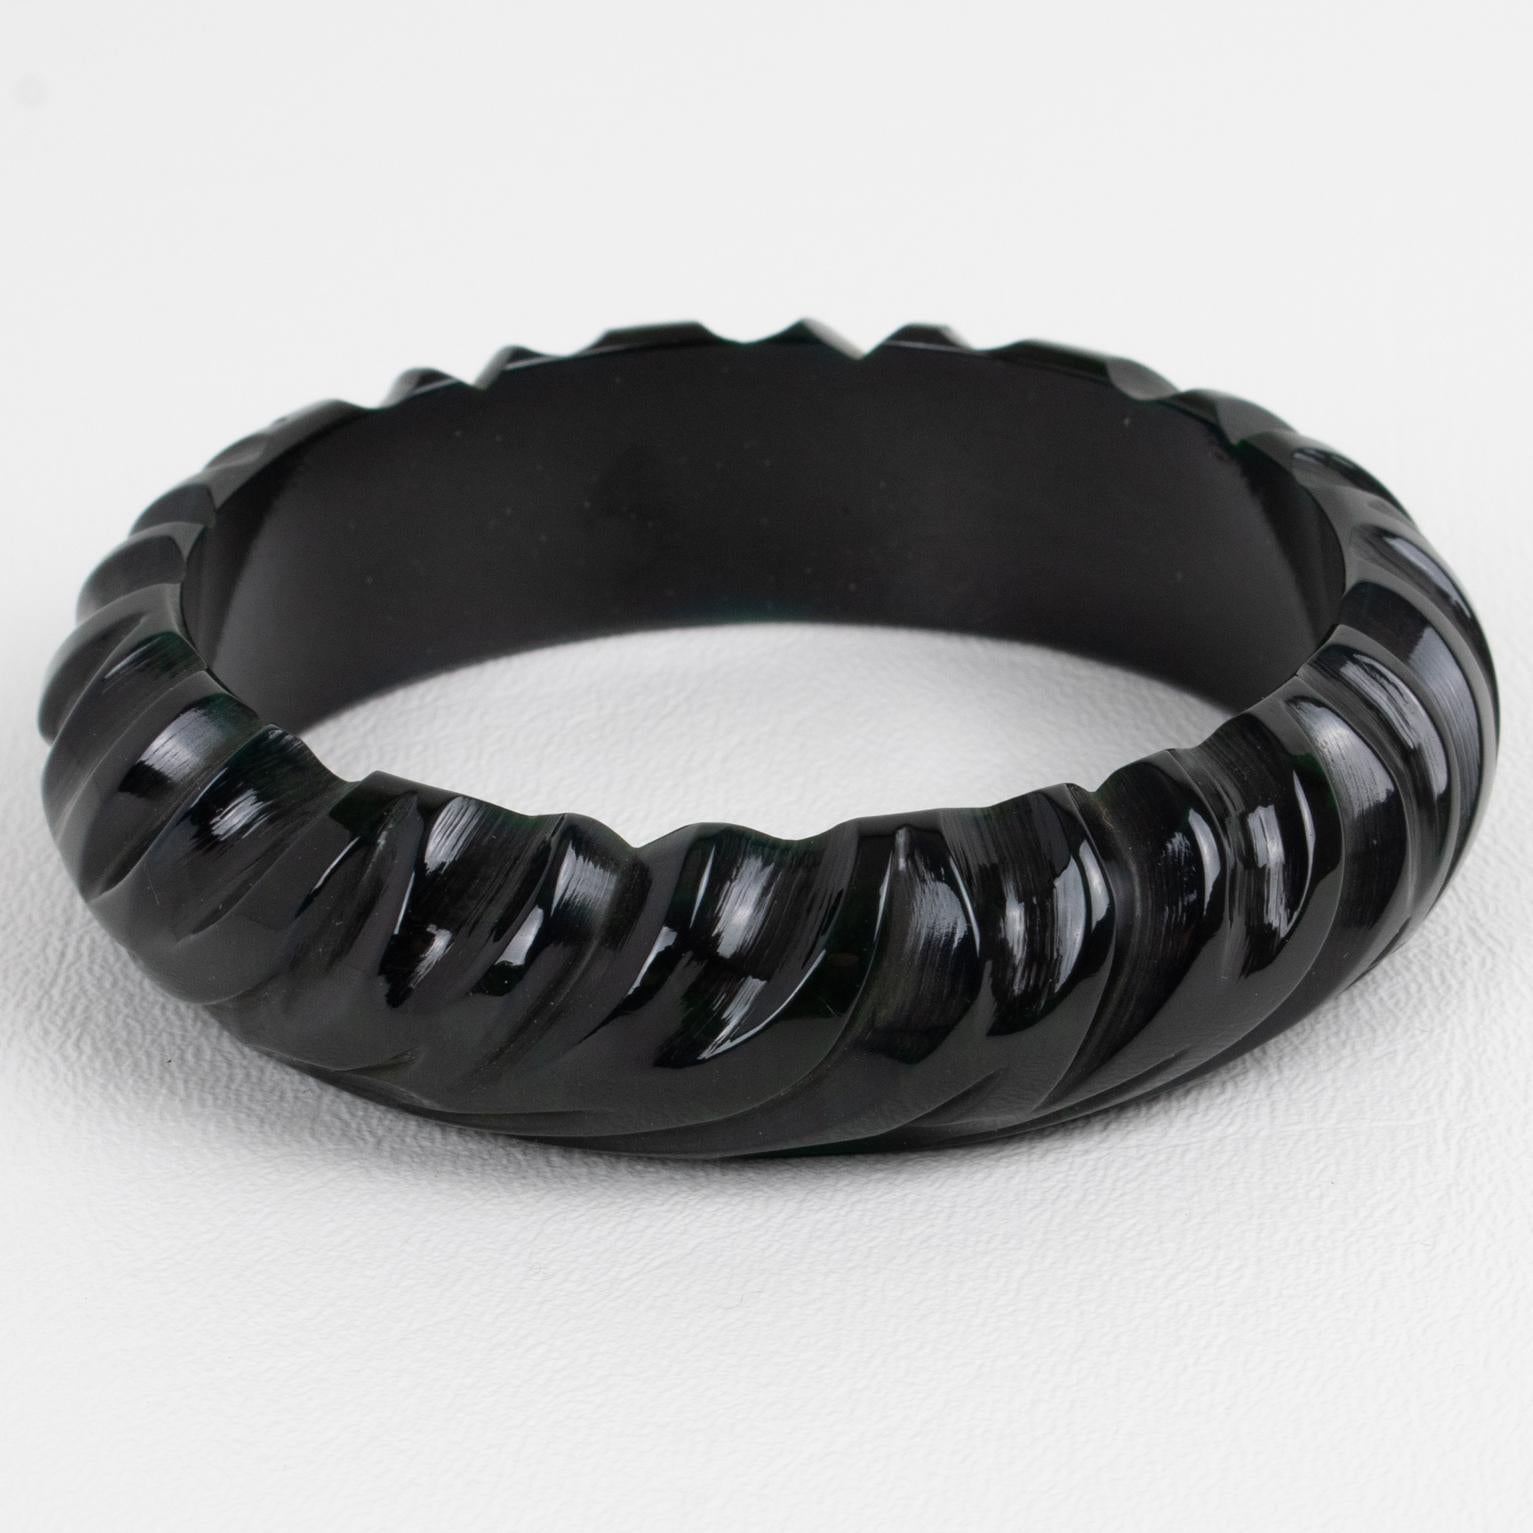 This is a lovely black Bakelite carved bracelet bangle. It features a chunky domed shape with deep geometric carving all around. The color is an intense true licorice black tone.
Measurements: Inside across is 2.57 in diameter (6.5 cm) - outside